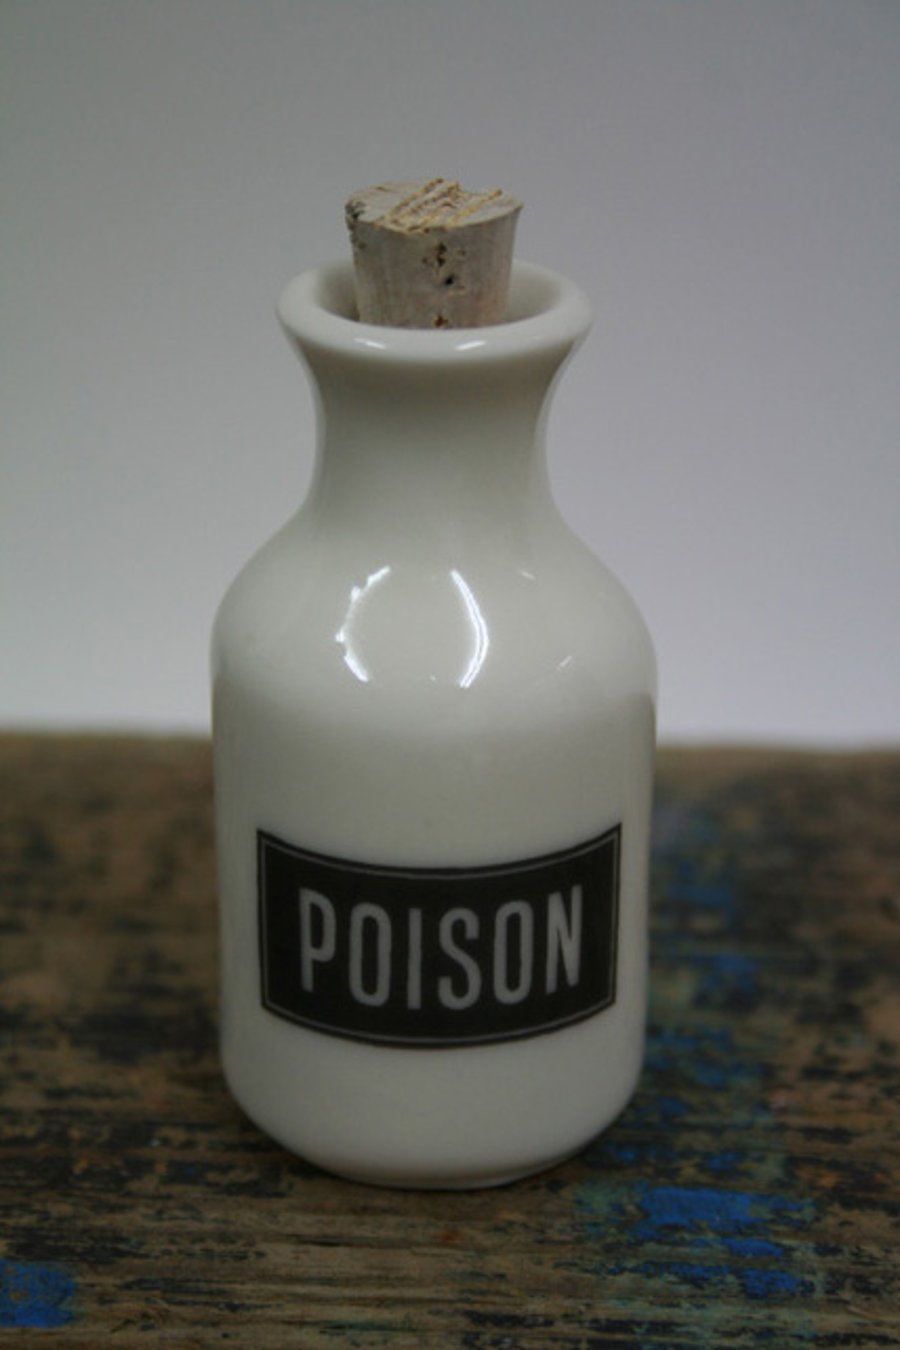 Small porcelain bottle with poison wording